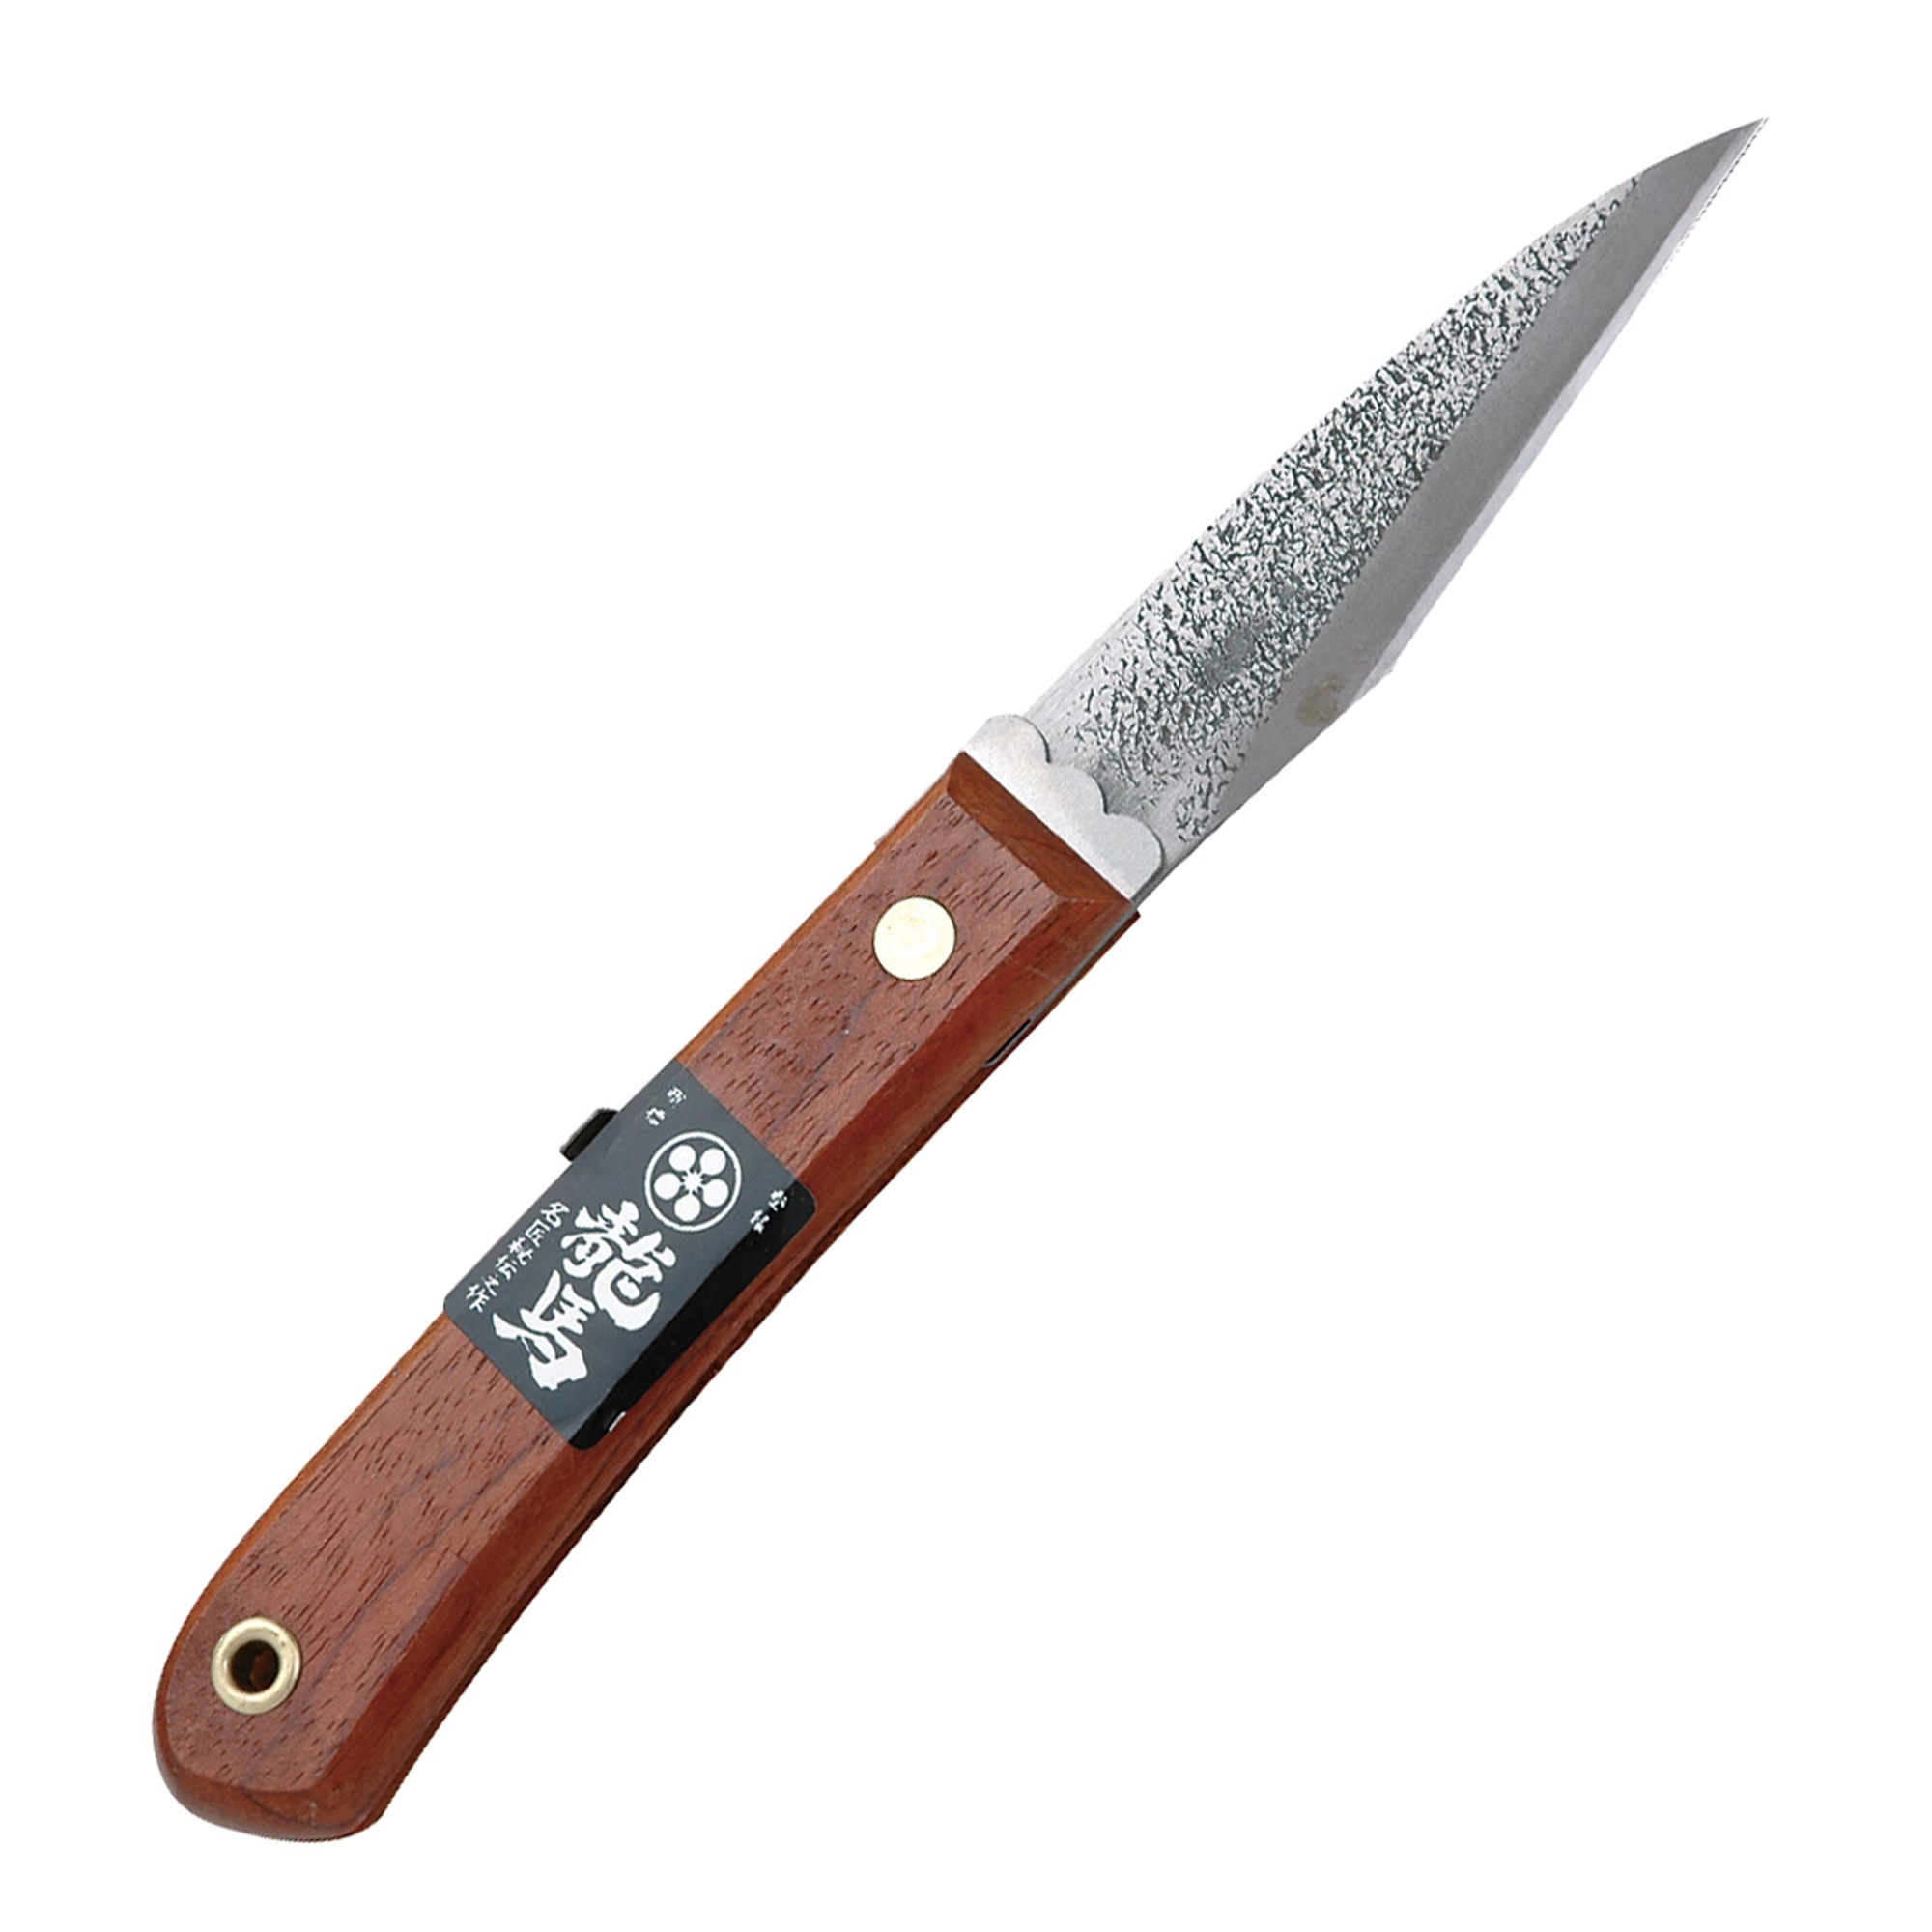 Michihamono Japanese Wood Carving Hand Tool Woodworking Hook Knife, with  Blade Sheath, for Spoon & Bowl Carving 60mm